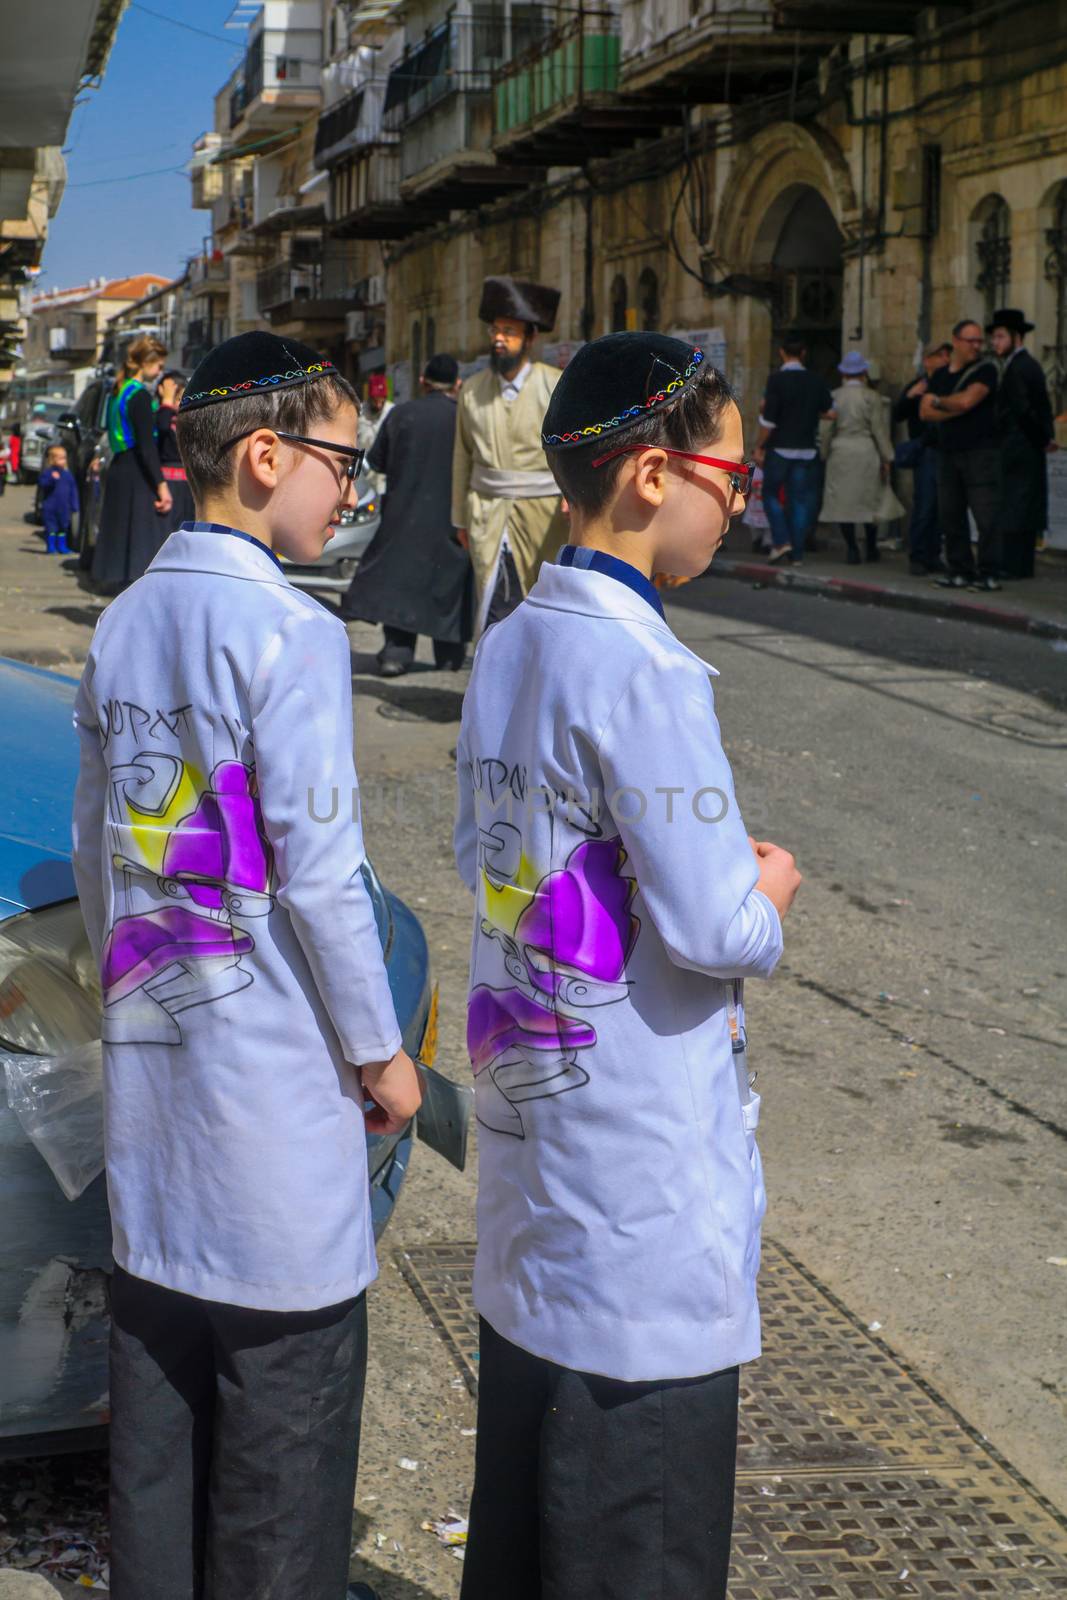 JERUSALEM, ISRAEL - MARCH 25, 2016: Street scene of the Jewish Holyday Purim, with locals, some wearing costumes, in the ultra-orthodox neighborhood Mea Shearim, Jerusalem, Israel